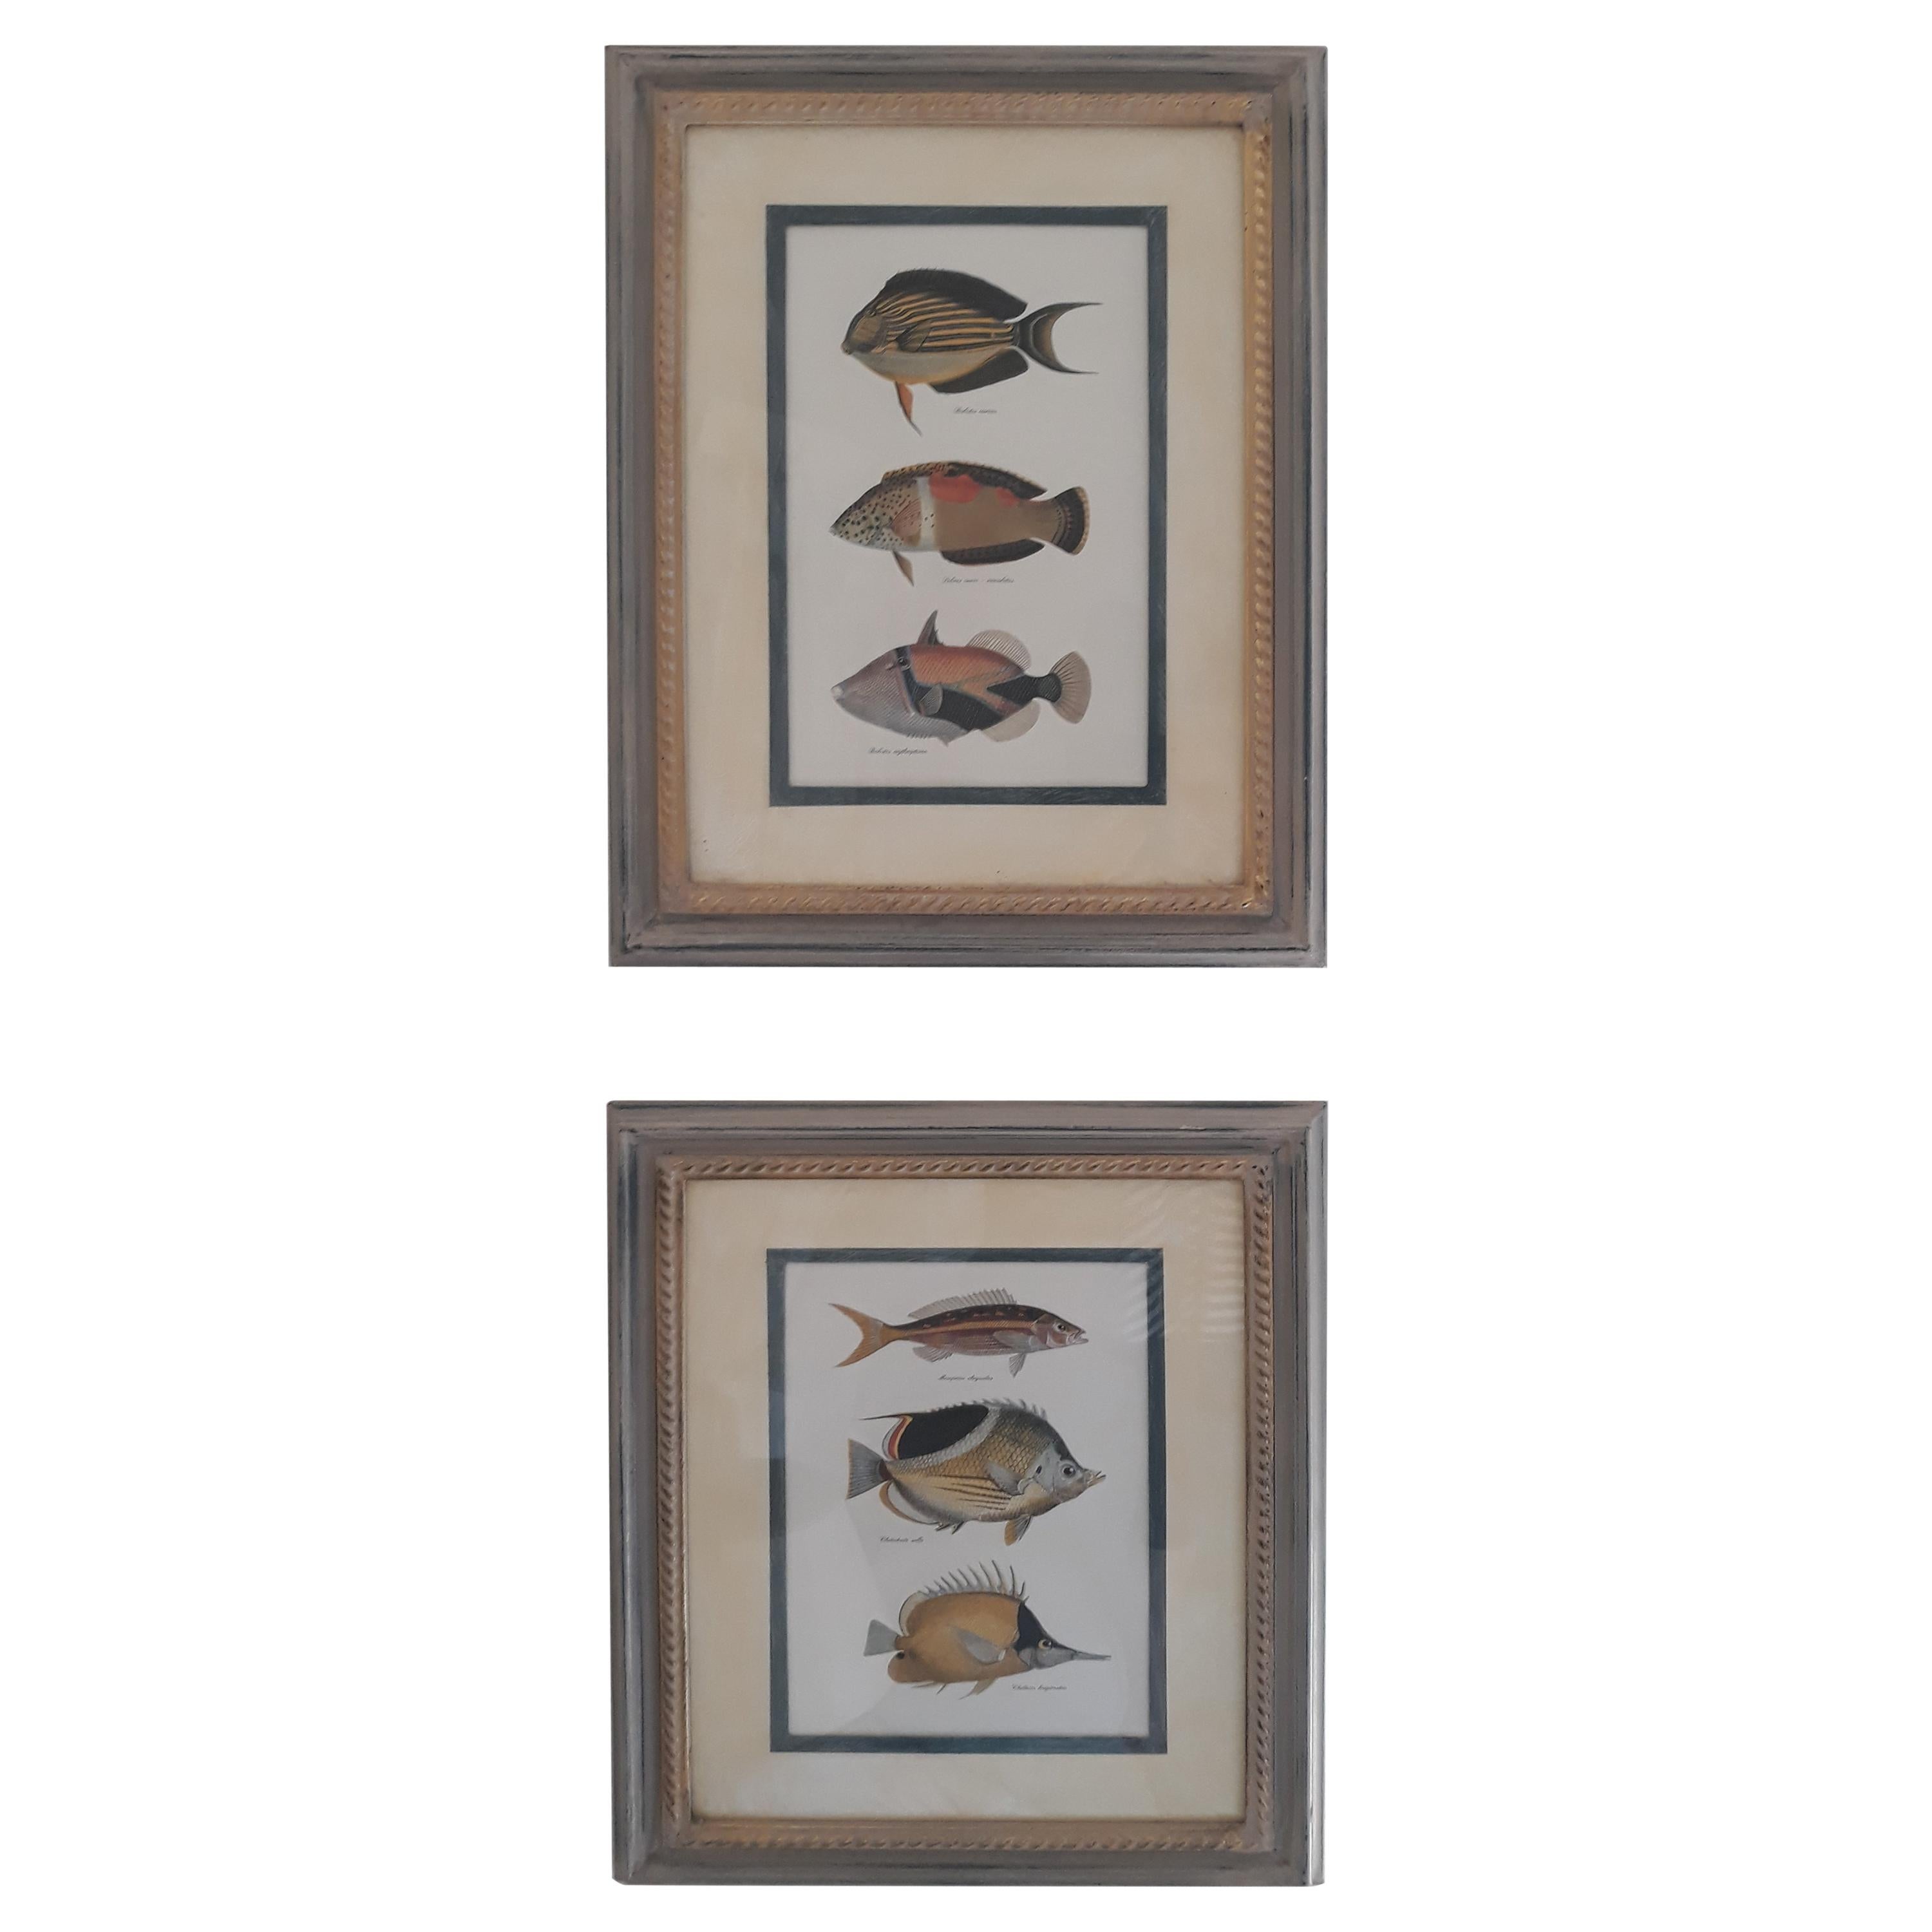 20th Century English "Tropical Fish" Prints with Frames, Martin Trowbridge, Pair For Sale